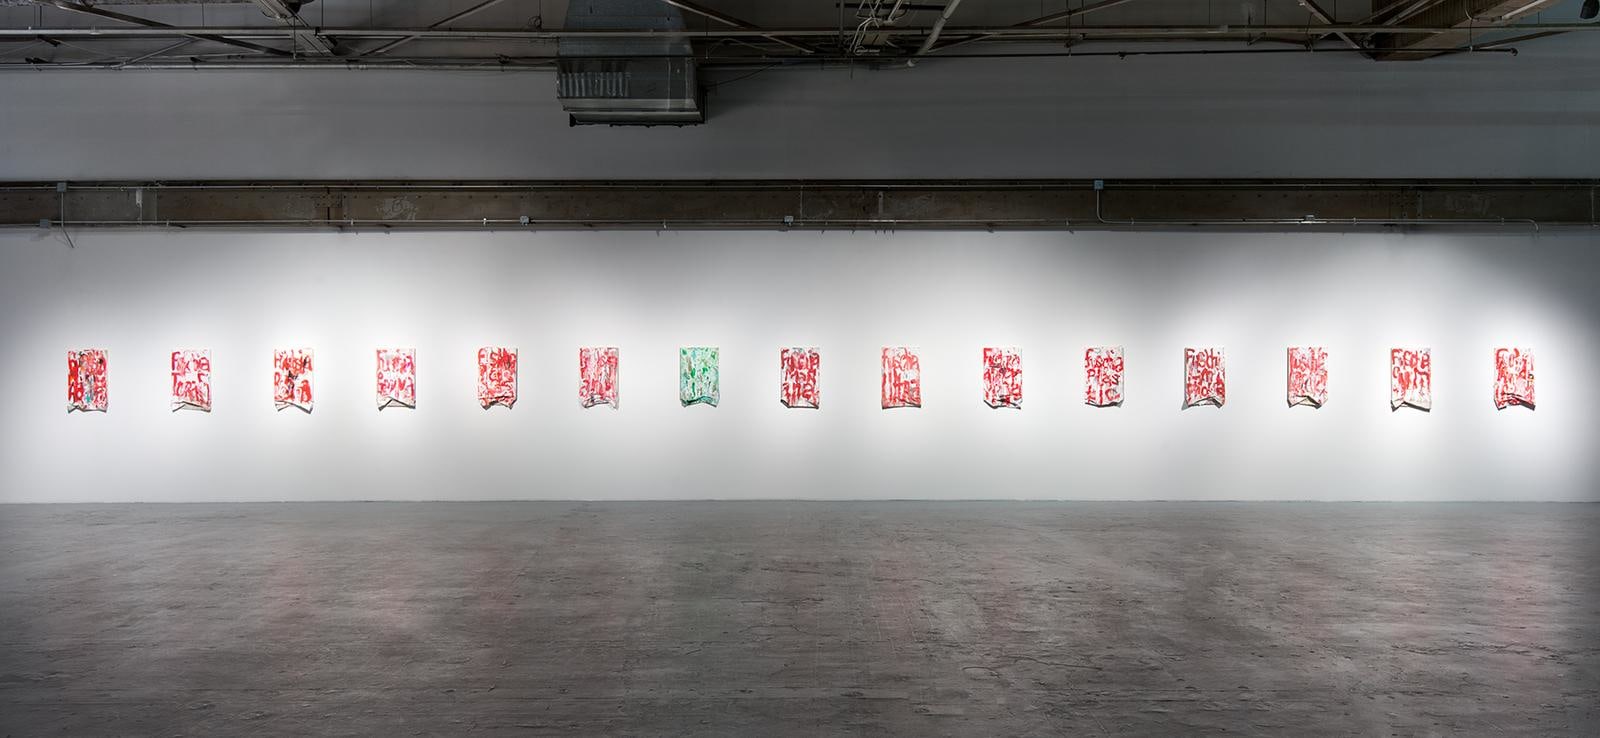  Installation view of William Pope.L: Trinket, March 20&ndash;June 28, 2015 at The Geffen Contemporary at MOCA, courtesy of the artist and The Museum of Contemporary Art, Los Angeles, photo by Brian Forrest